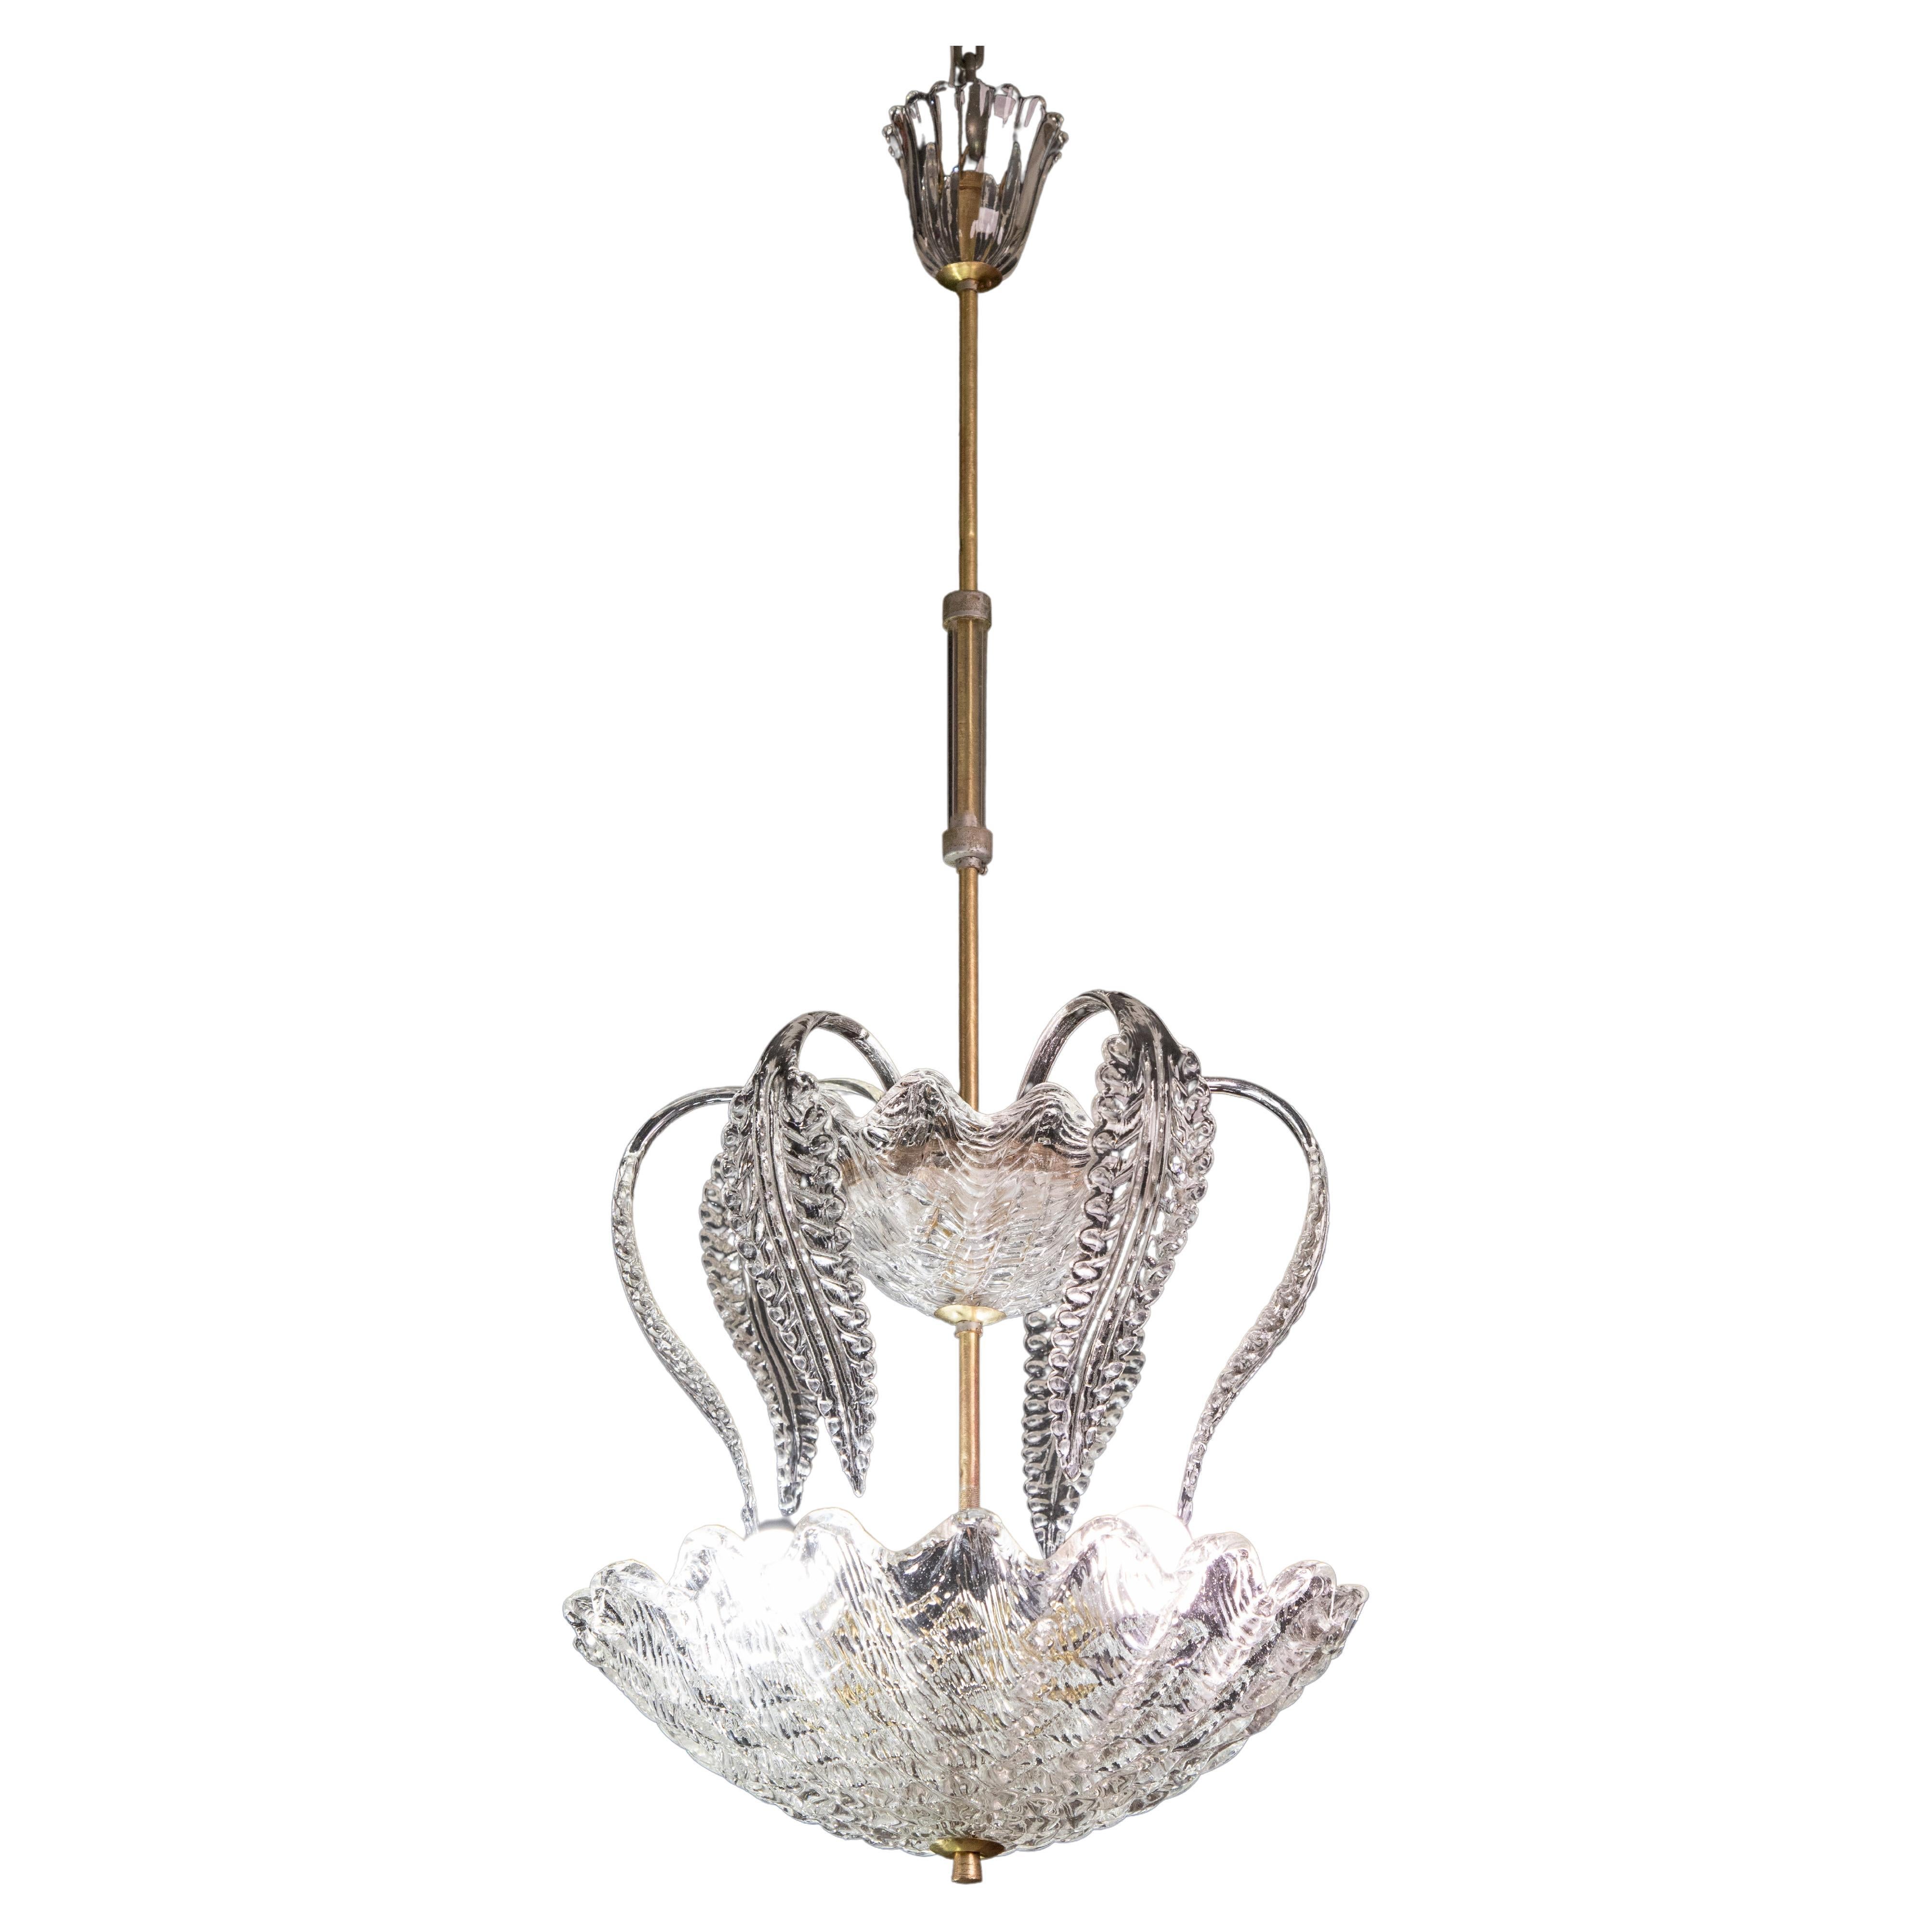 Splendid Art Deco chandelier attributed to Ercole Barovier made by the Barovier & Toso glassworks in the 1940s-1950s.
The chandelier is 95cm high and 40cm wide.
The glass elements make this fountain pendant extremely unique.
All glass and frame are